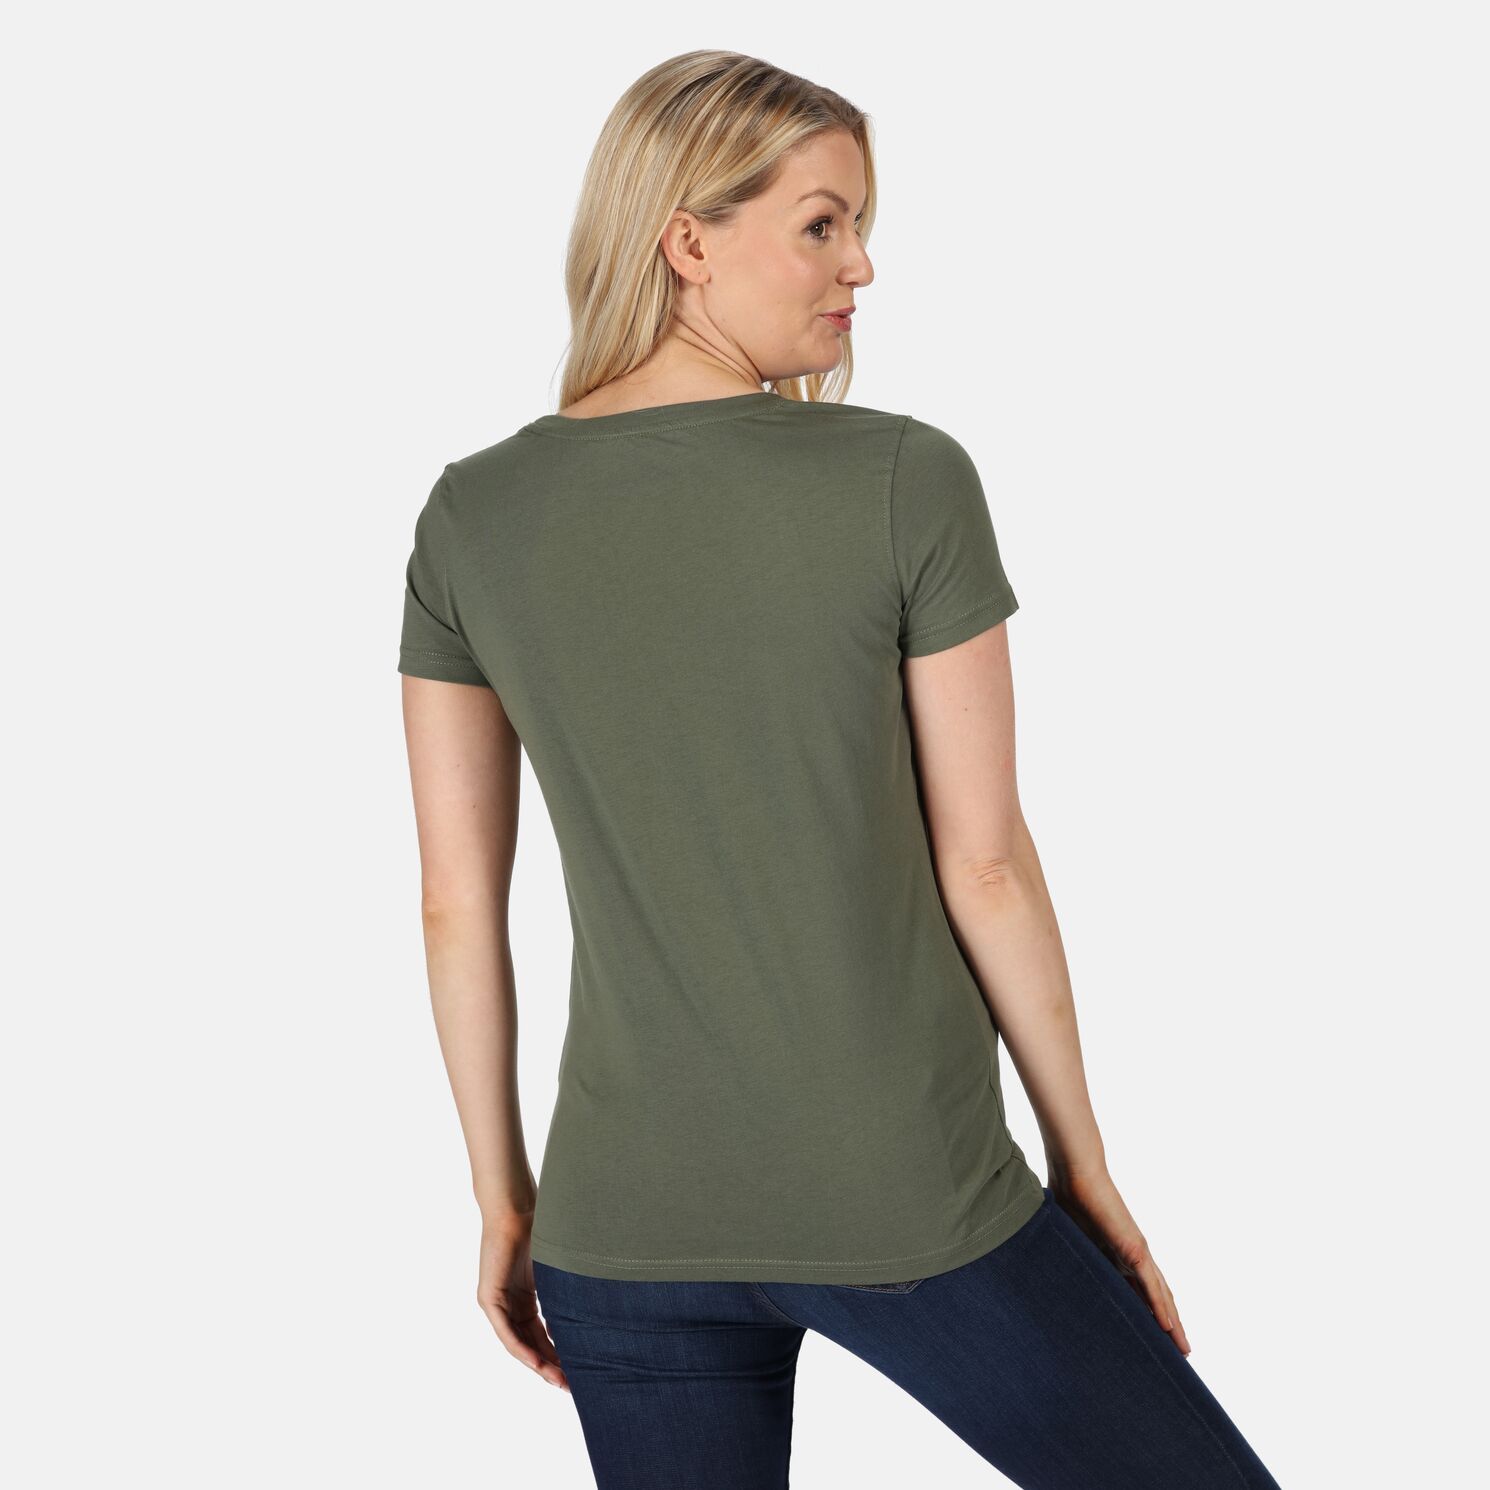 Material: 100% Cotton. Sustainably sourced, casual crew neck t-shirt made from 160gsm Coolweave 100% Organic Cotton jersey fabric. Features an in-house print inspired by all things outdoors. Garment washed for a softer, broken-in feel.